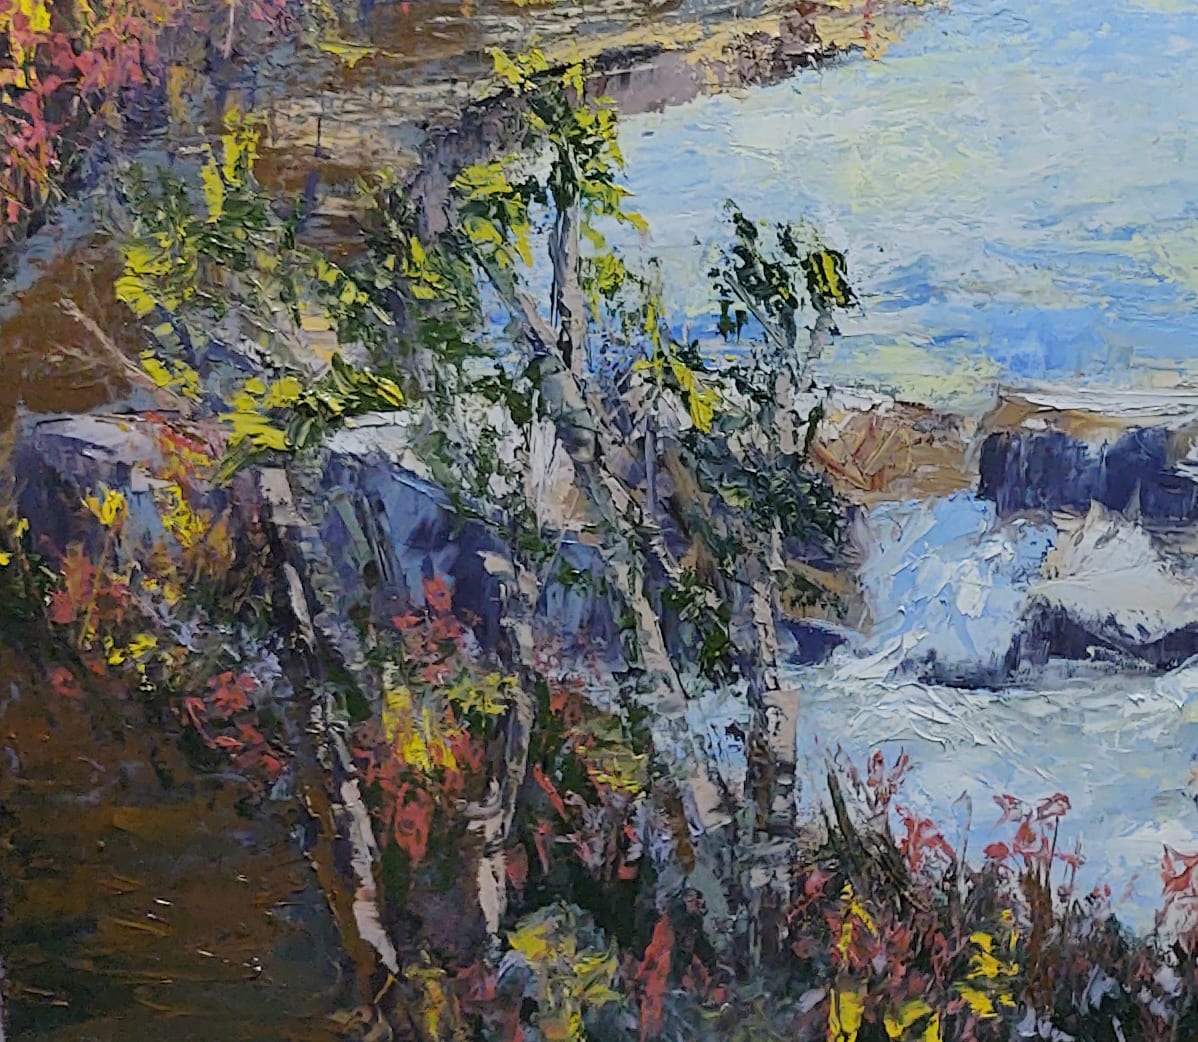 Laurel River Trail by Linda Riesenberg Fisler  Image: This is the cropped left foreground of the painting.